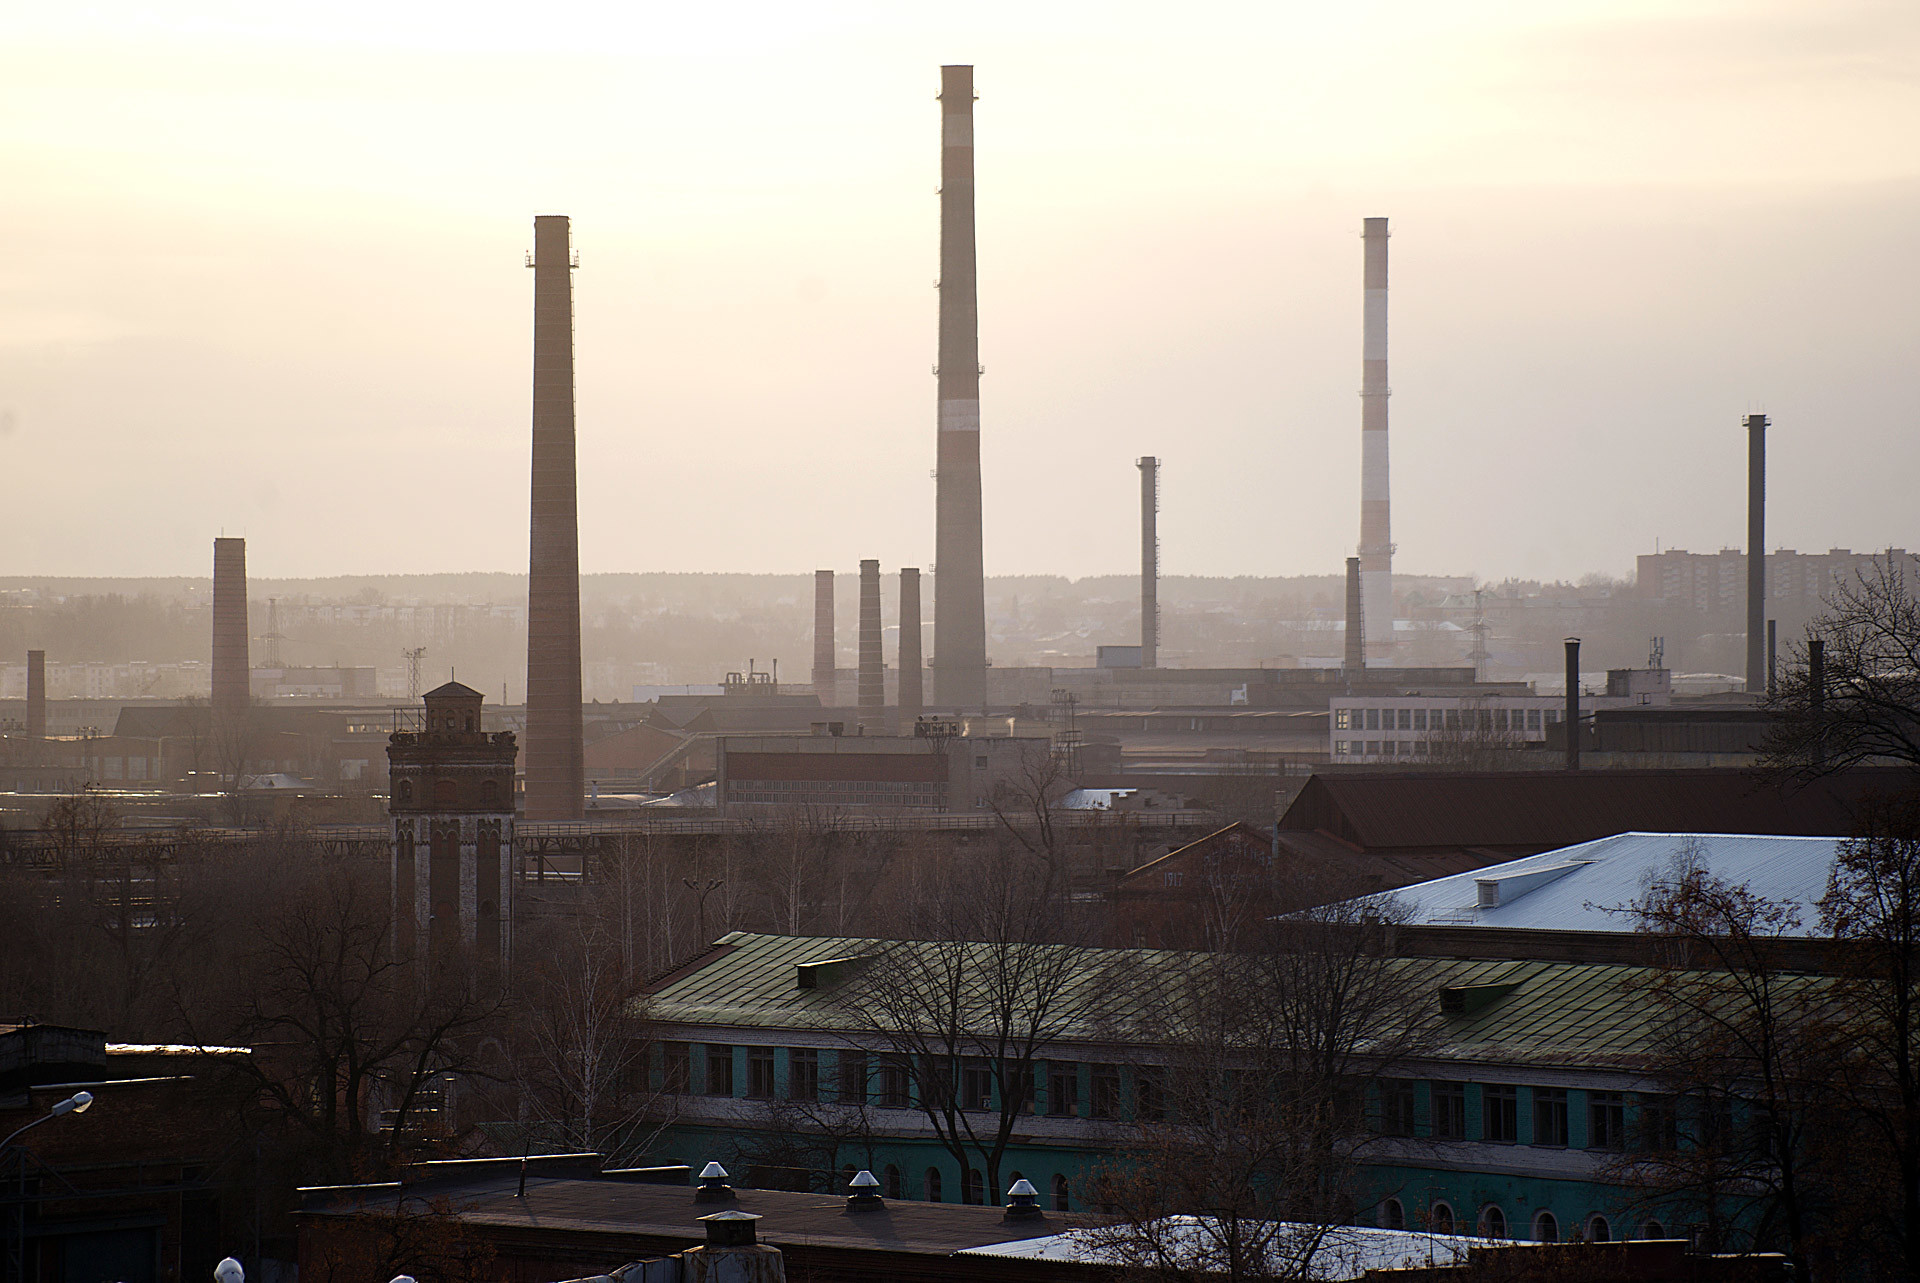 “Progressive” district of Izhevsk looks like it can fit in your palm: Pipes, concrete, Factory smoke, a colorless sky.